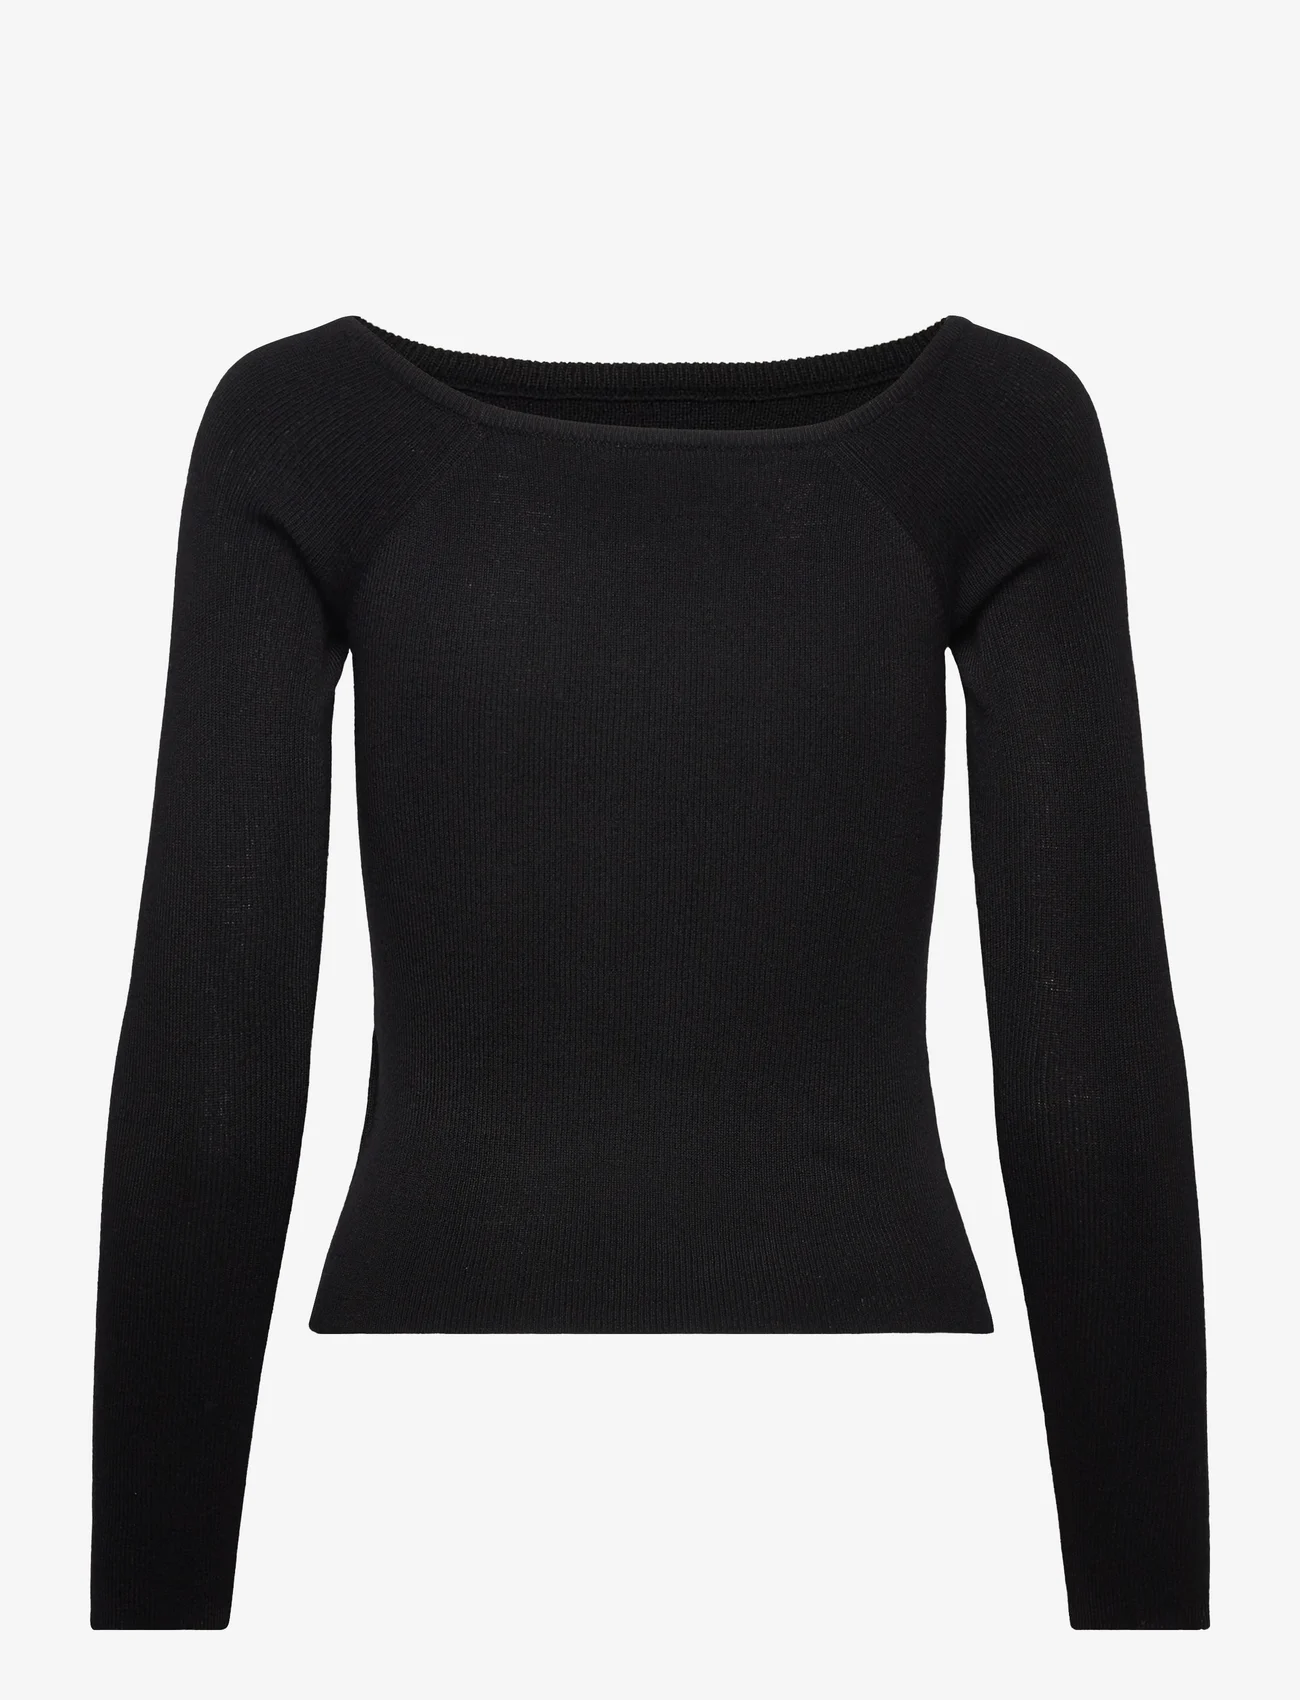 NOISY MAY - NMJAZ LS OFFSHOULDER KNIT TOP FWD LAB 2 - mažiausios kainos - black - 1